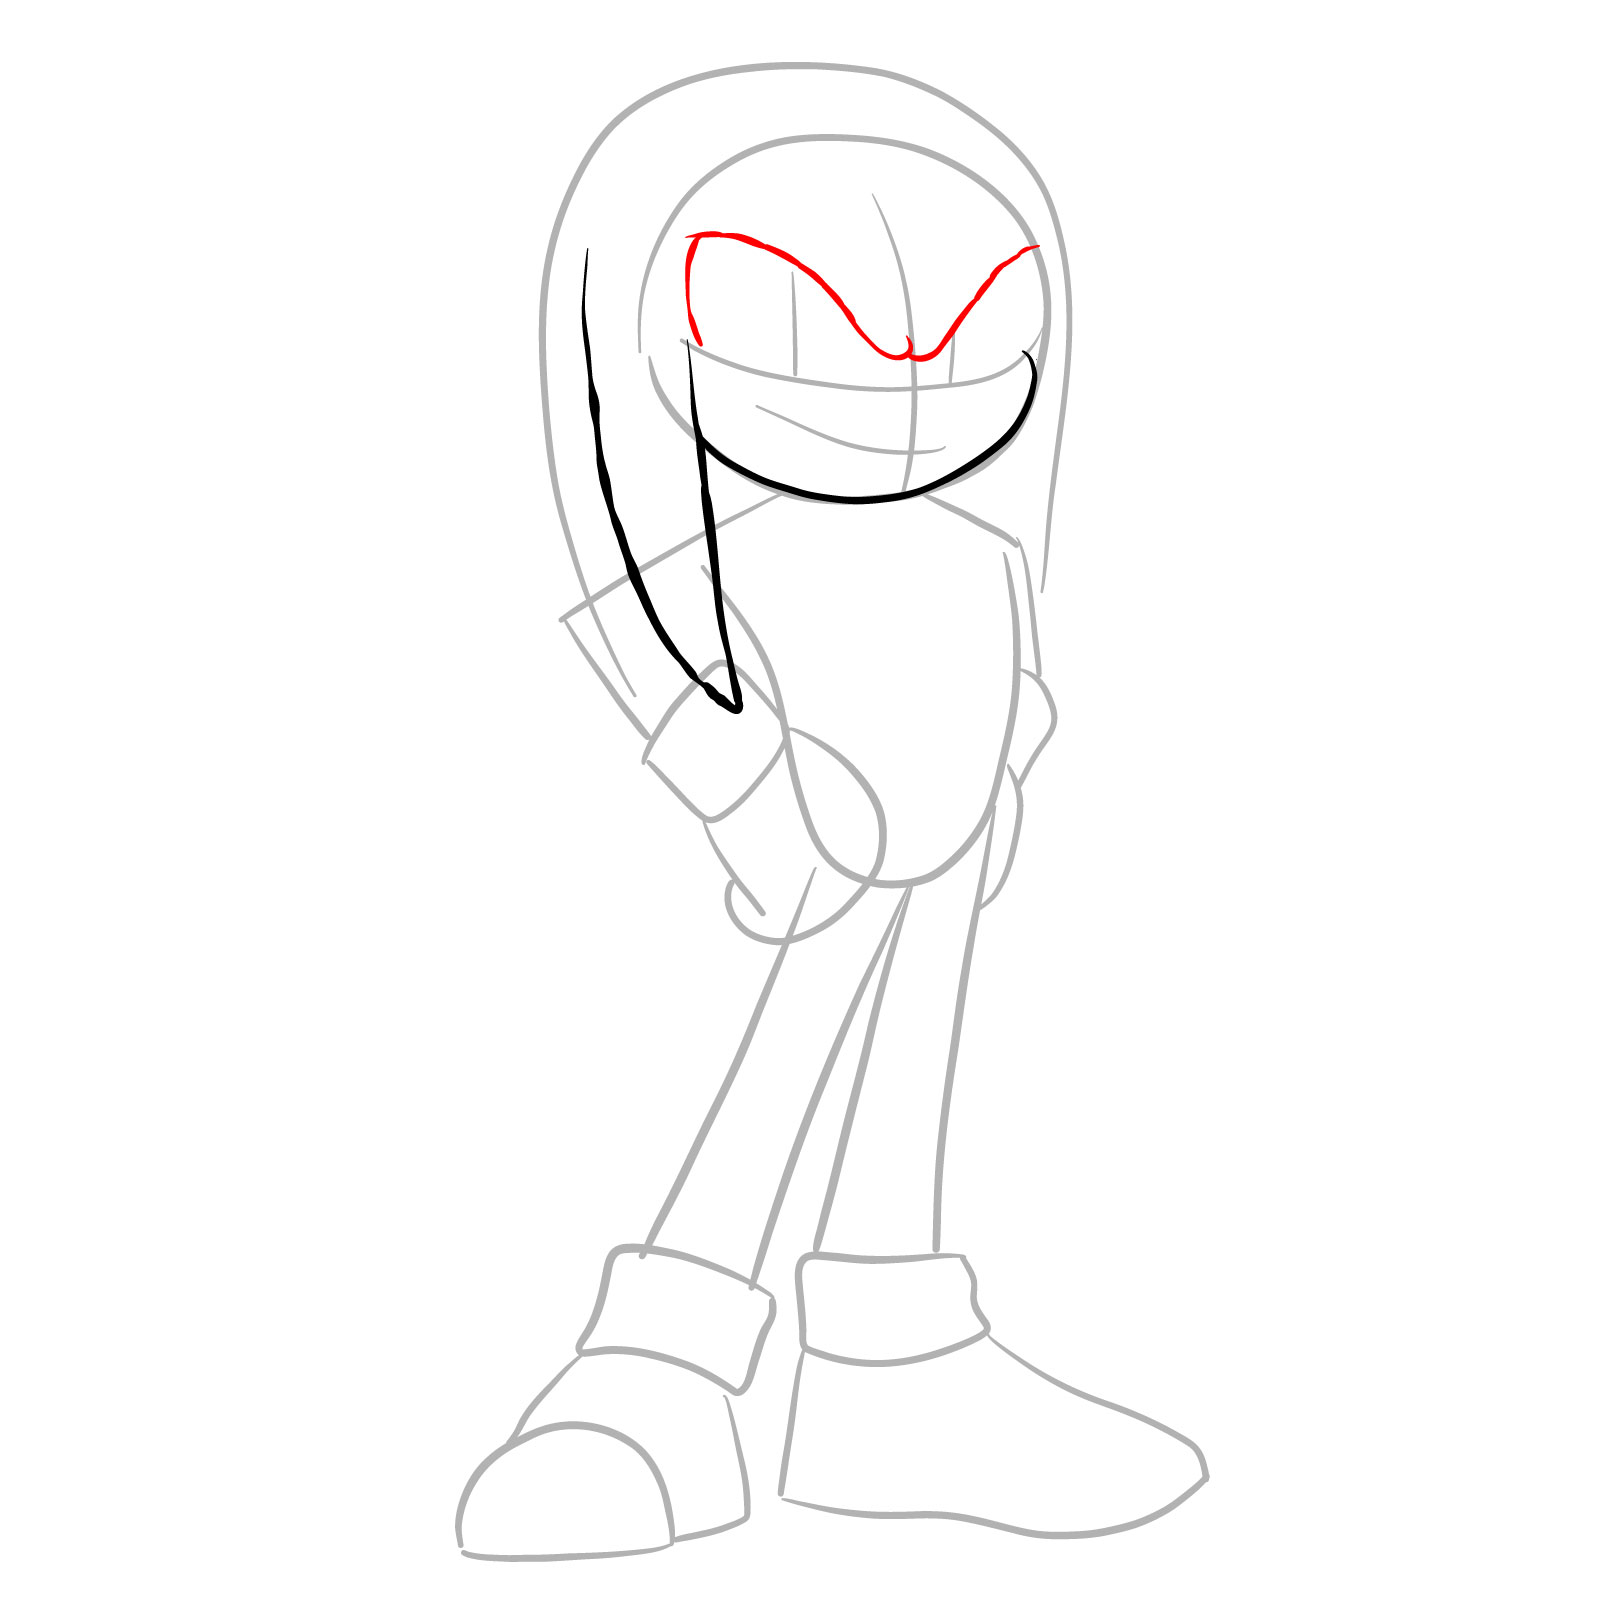 How to draw Knuckles from the movie - step 06